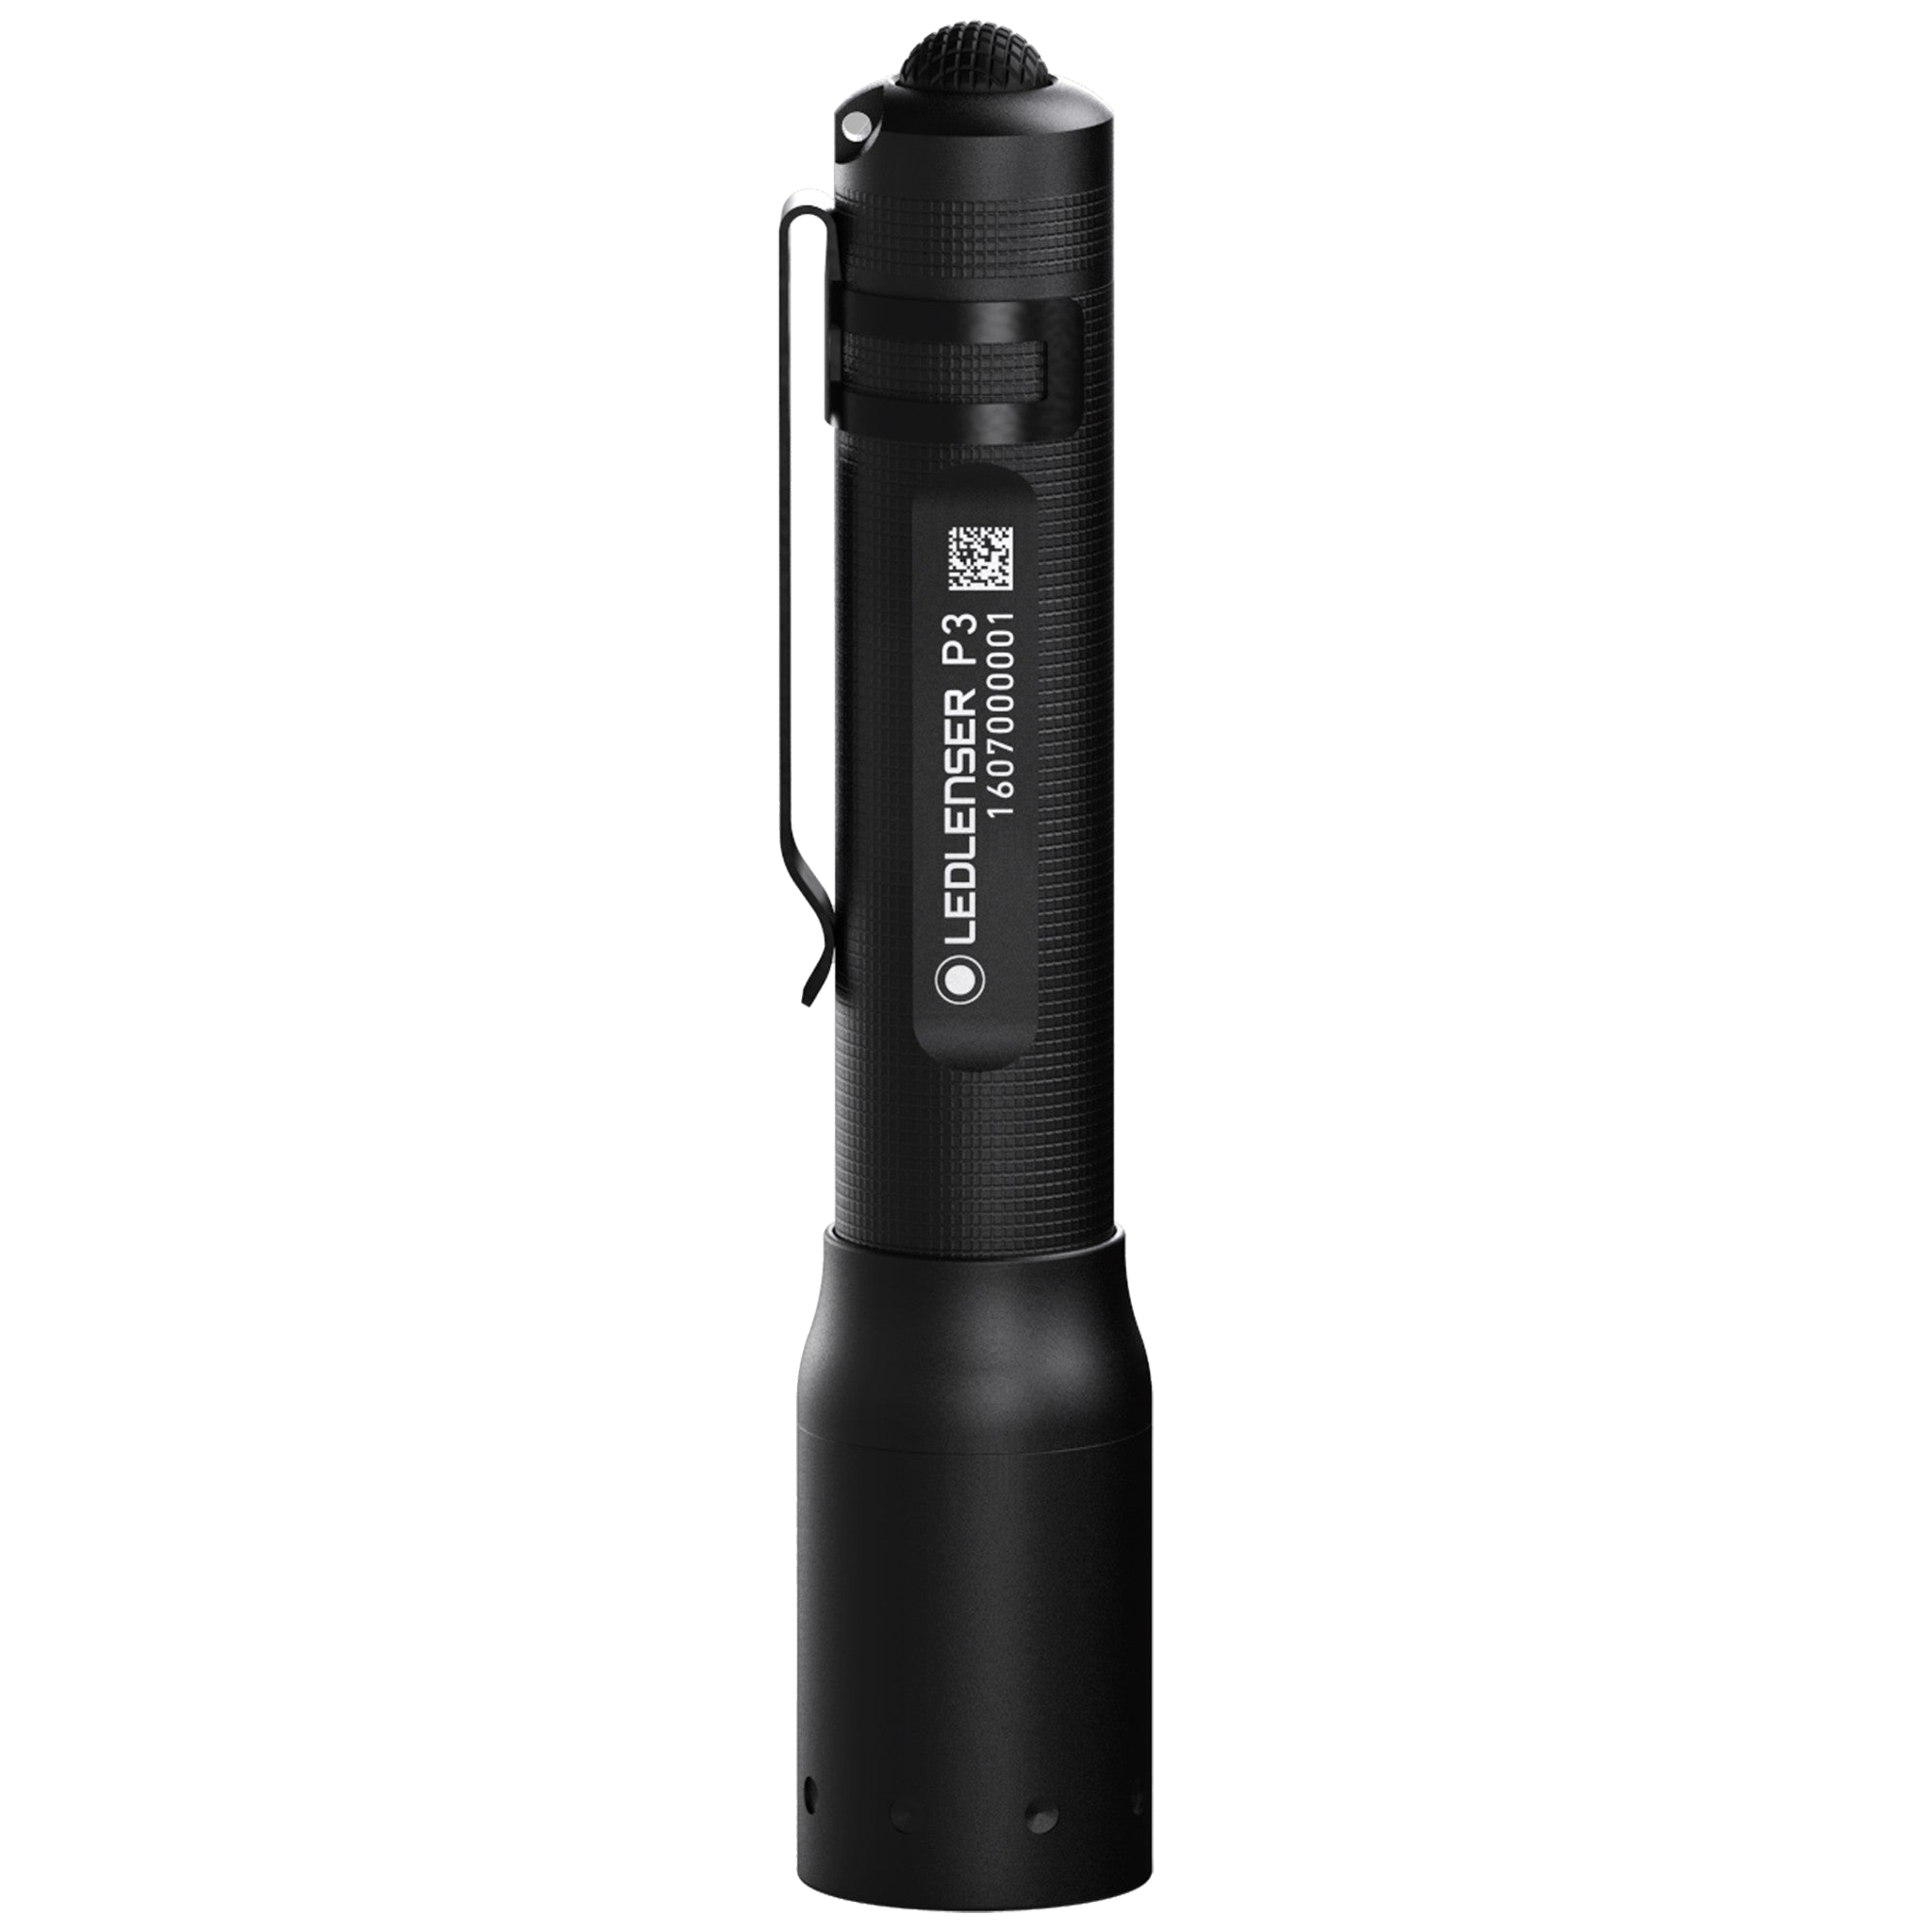 P3 Battery Operated Torch